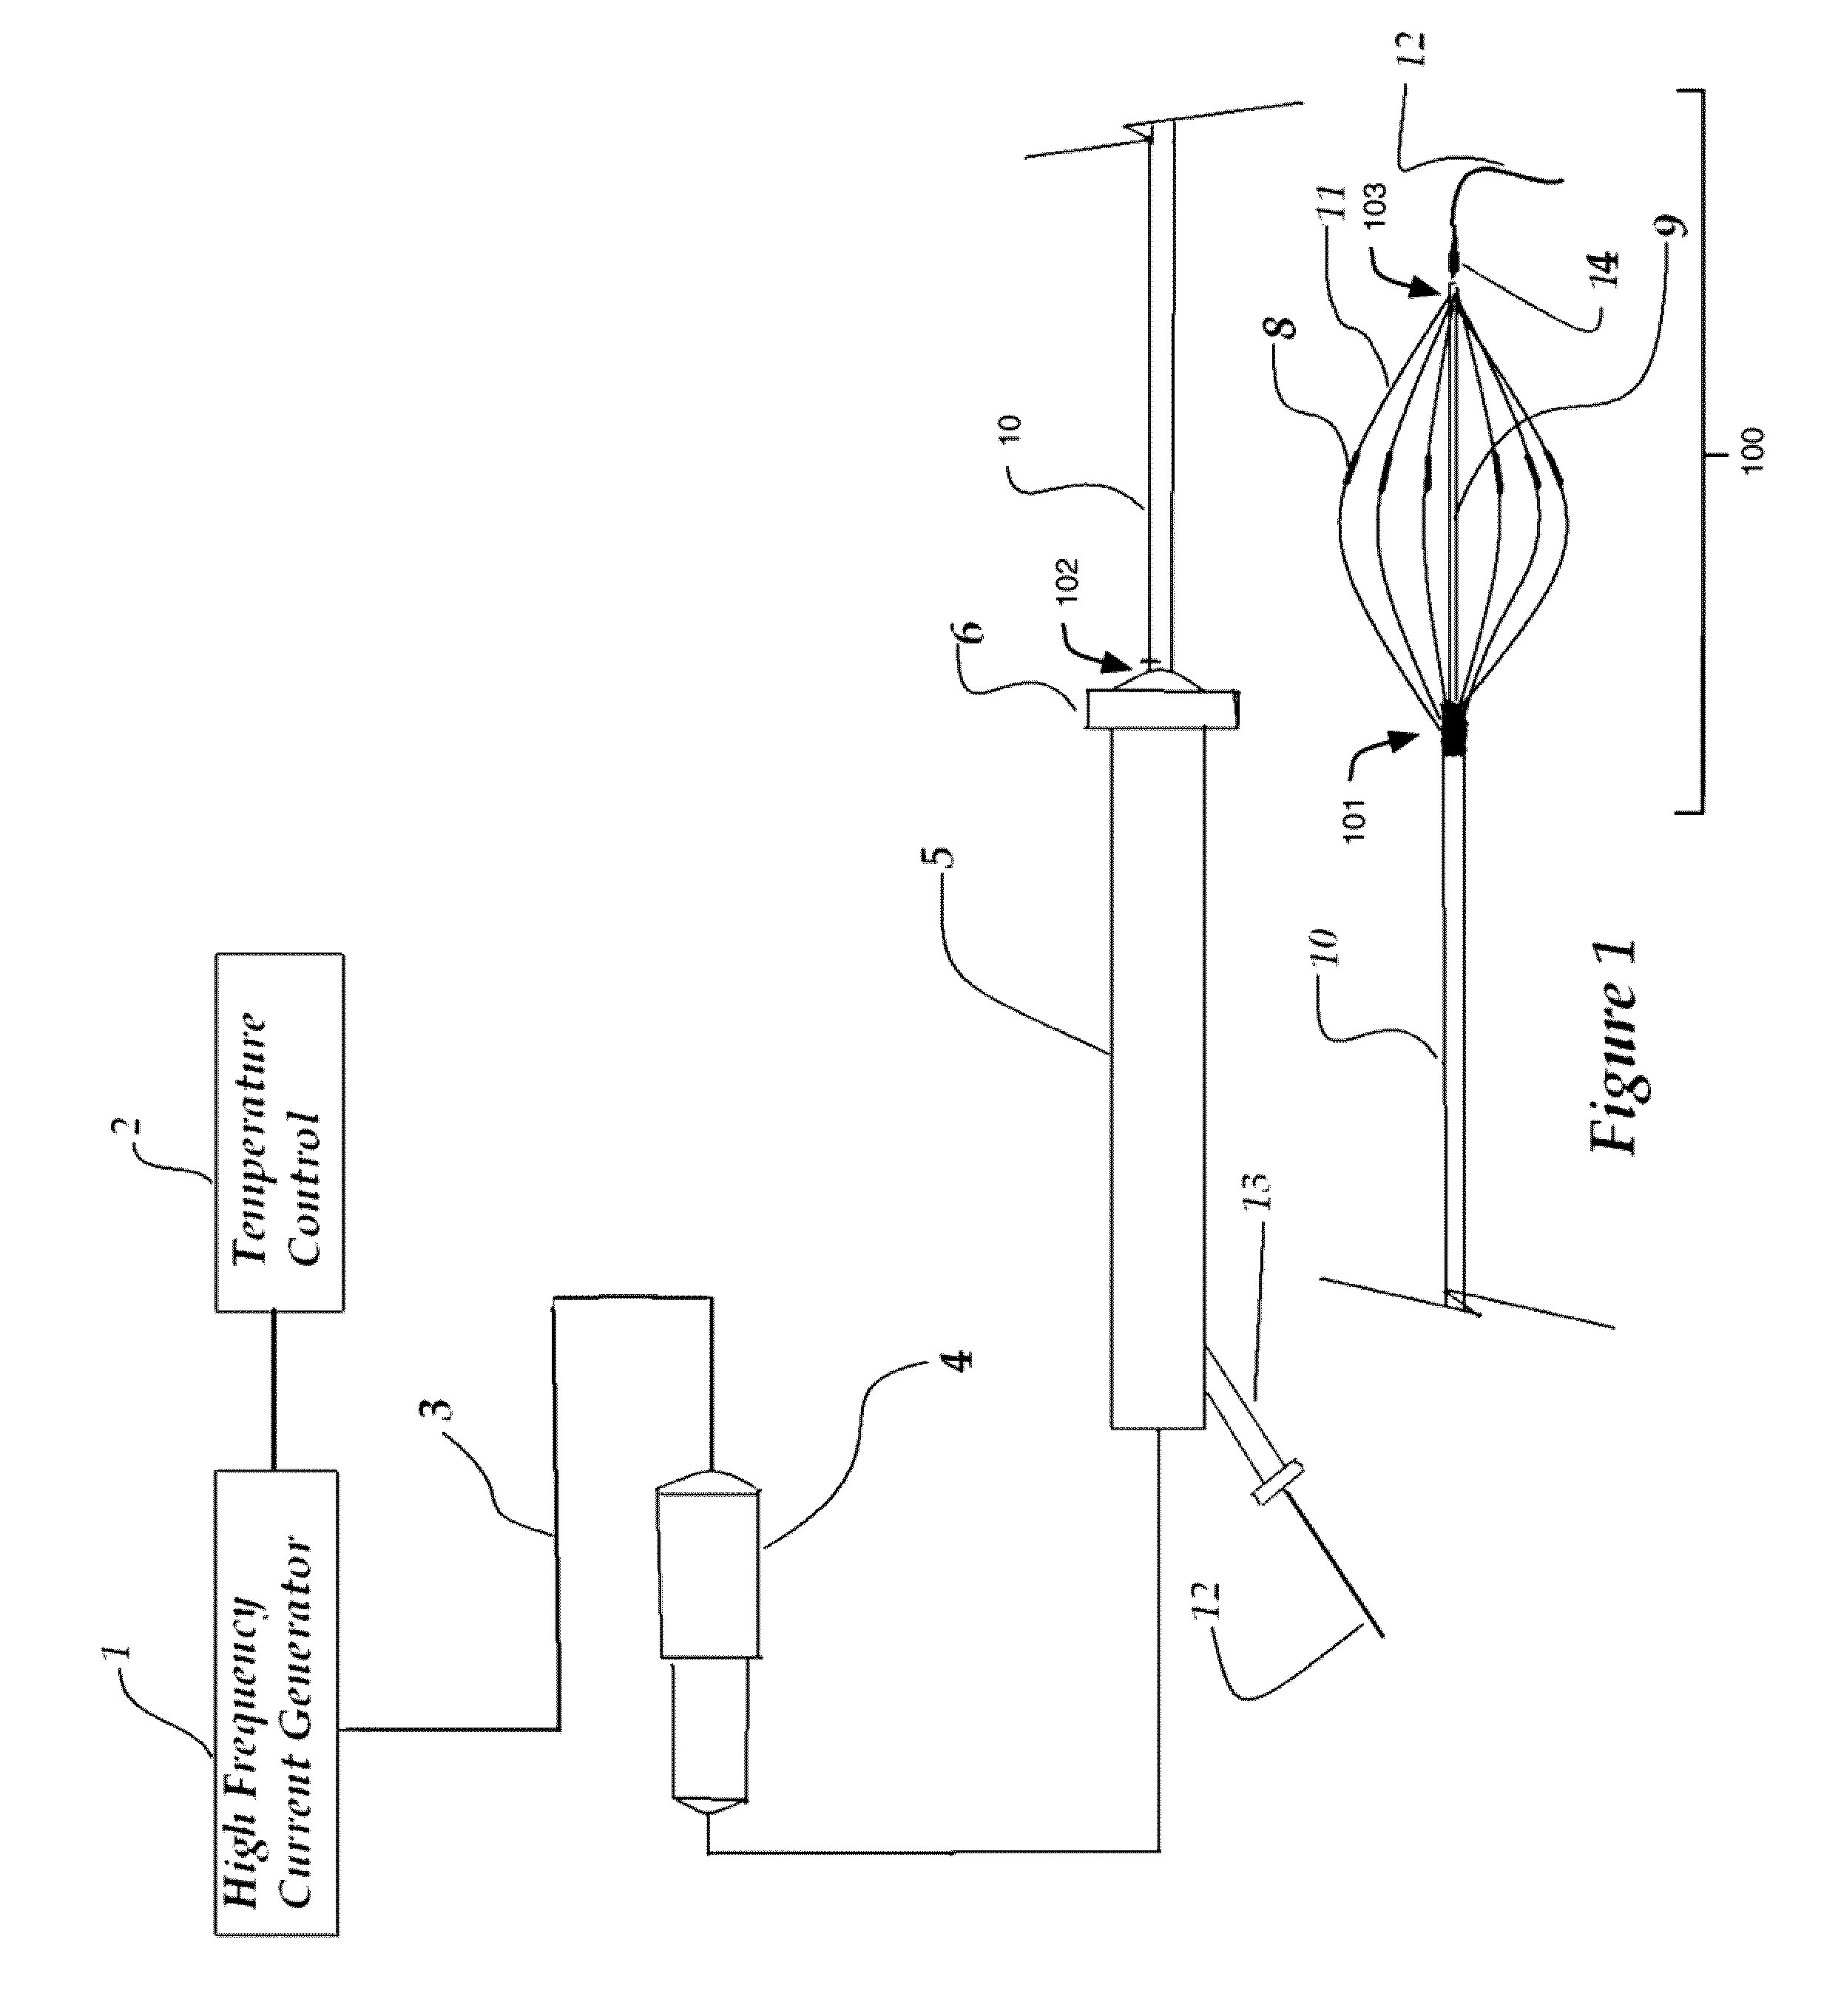 Device and method for treating annular organ structure